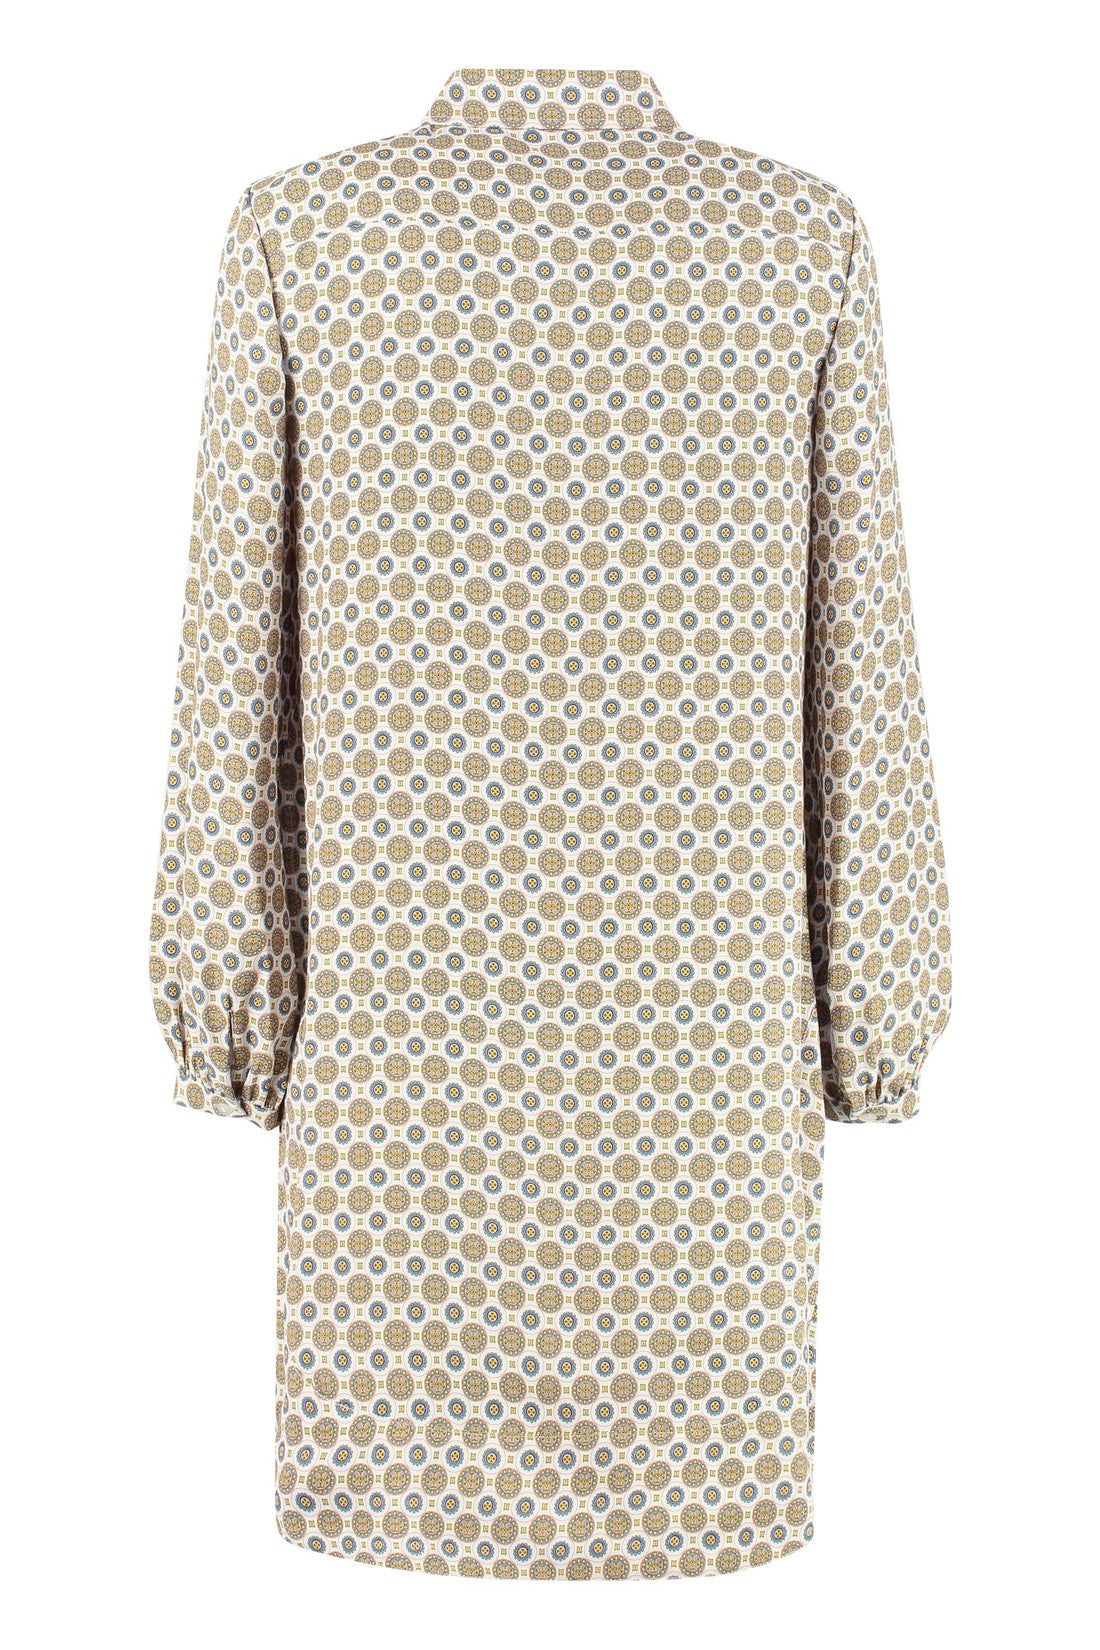 Tory Burch-OUTLET-SALE-Cora printed shirtdress-ARCHIVIST